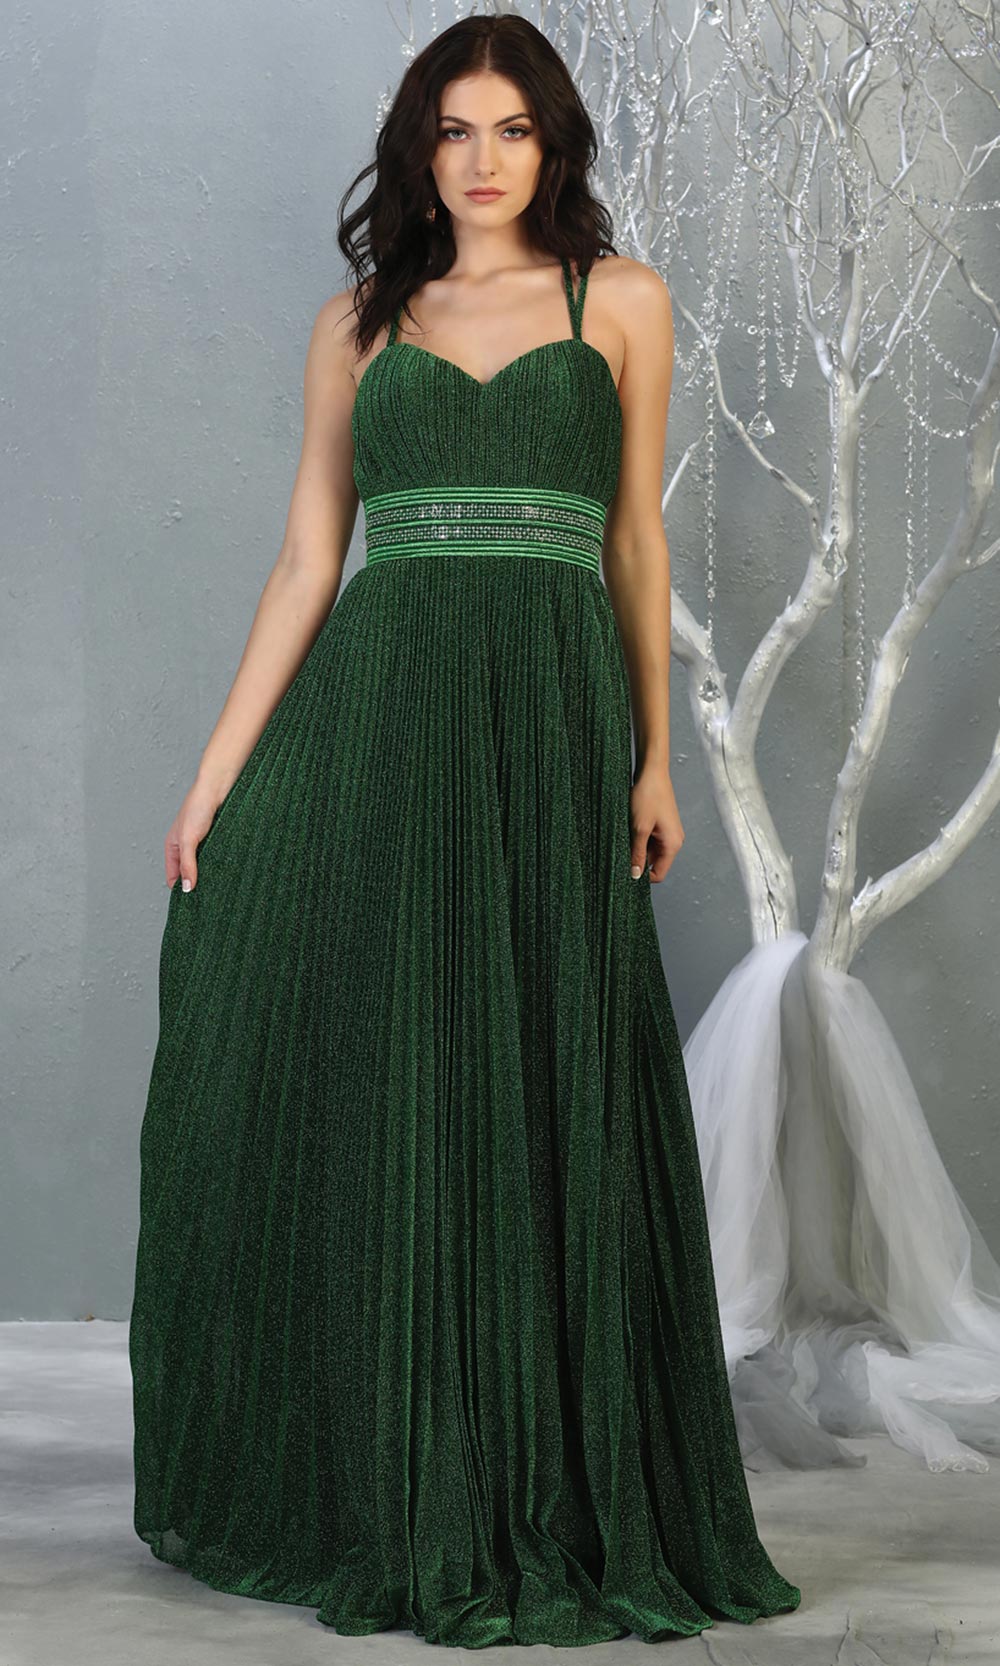 Mayqueen RQ7869 long hunter green metallic scoop neck evening gown w/straps & crinkle skirt. Full length flowy gown is perfect for  enagagement/e-shoot dress, formal wedding guest, evening party dress, prom, bridesmaids, black tie. Plus sizes avail.jpg